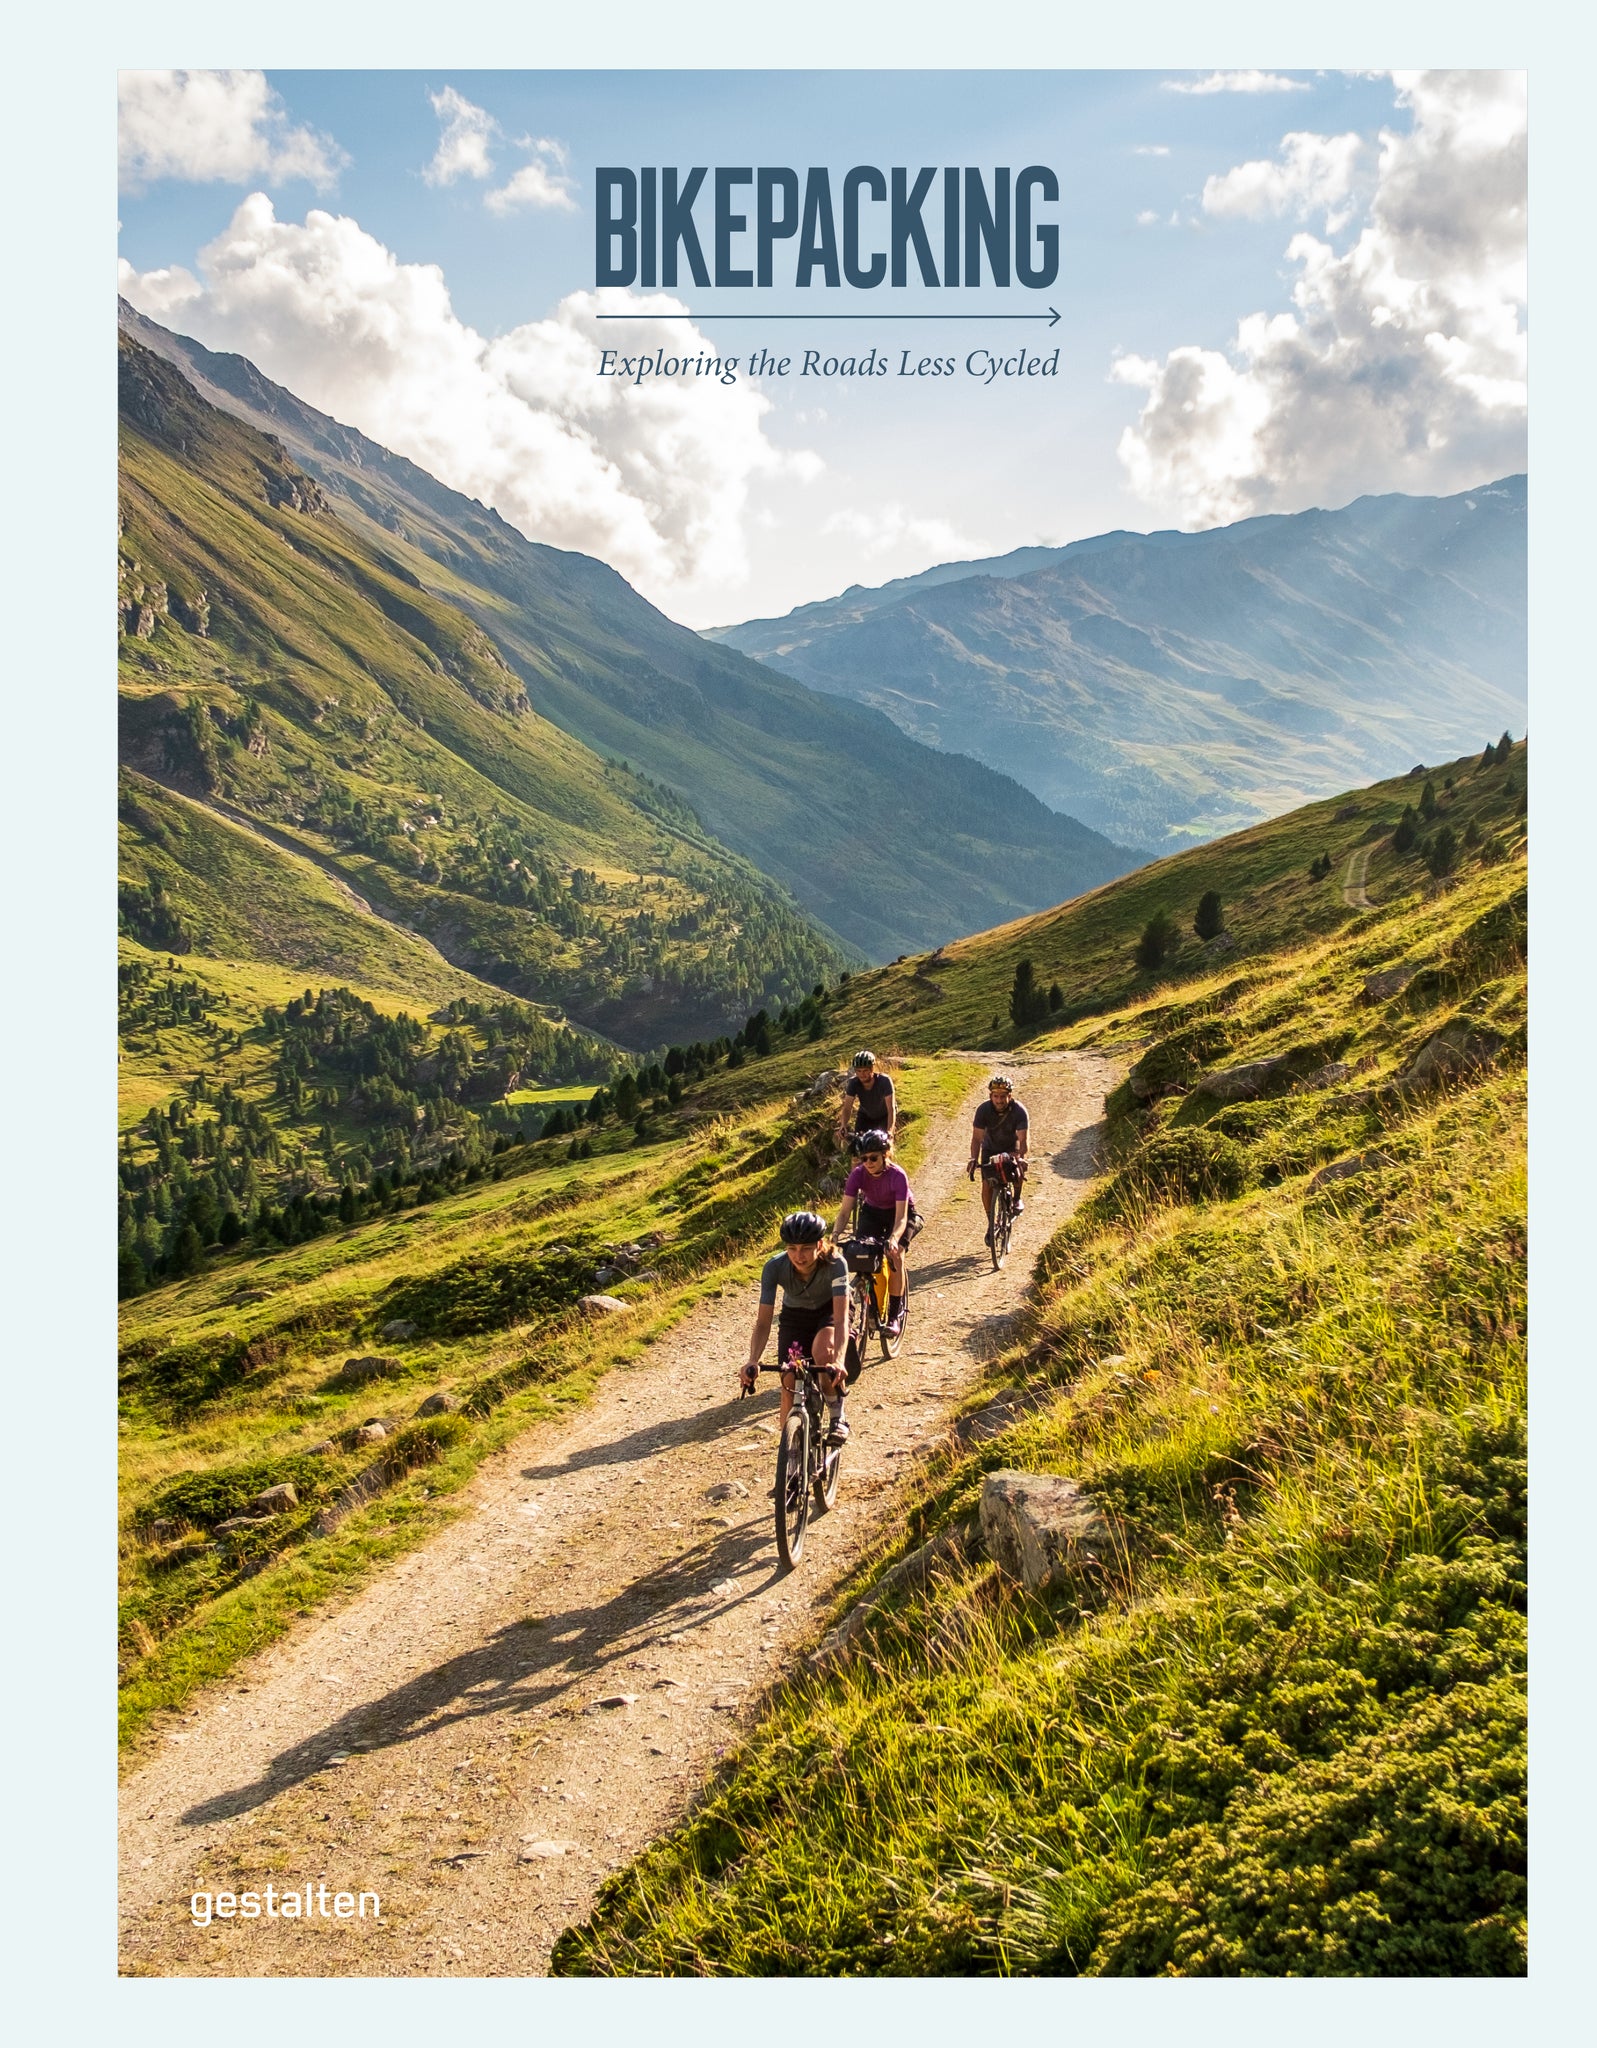 Bikepacking: Exploring the Roads Less Cycled (announced as Bicycle Getaways) cover